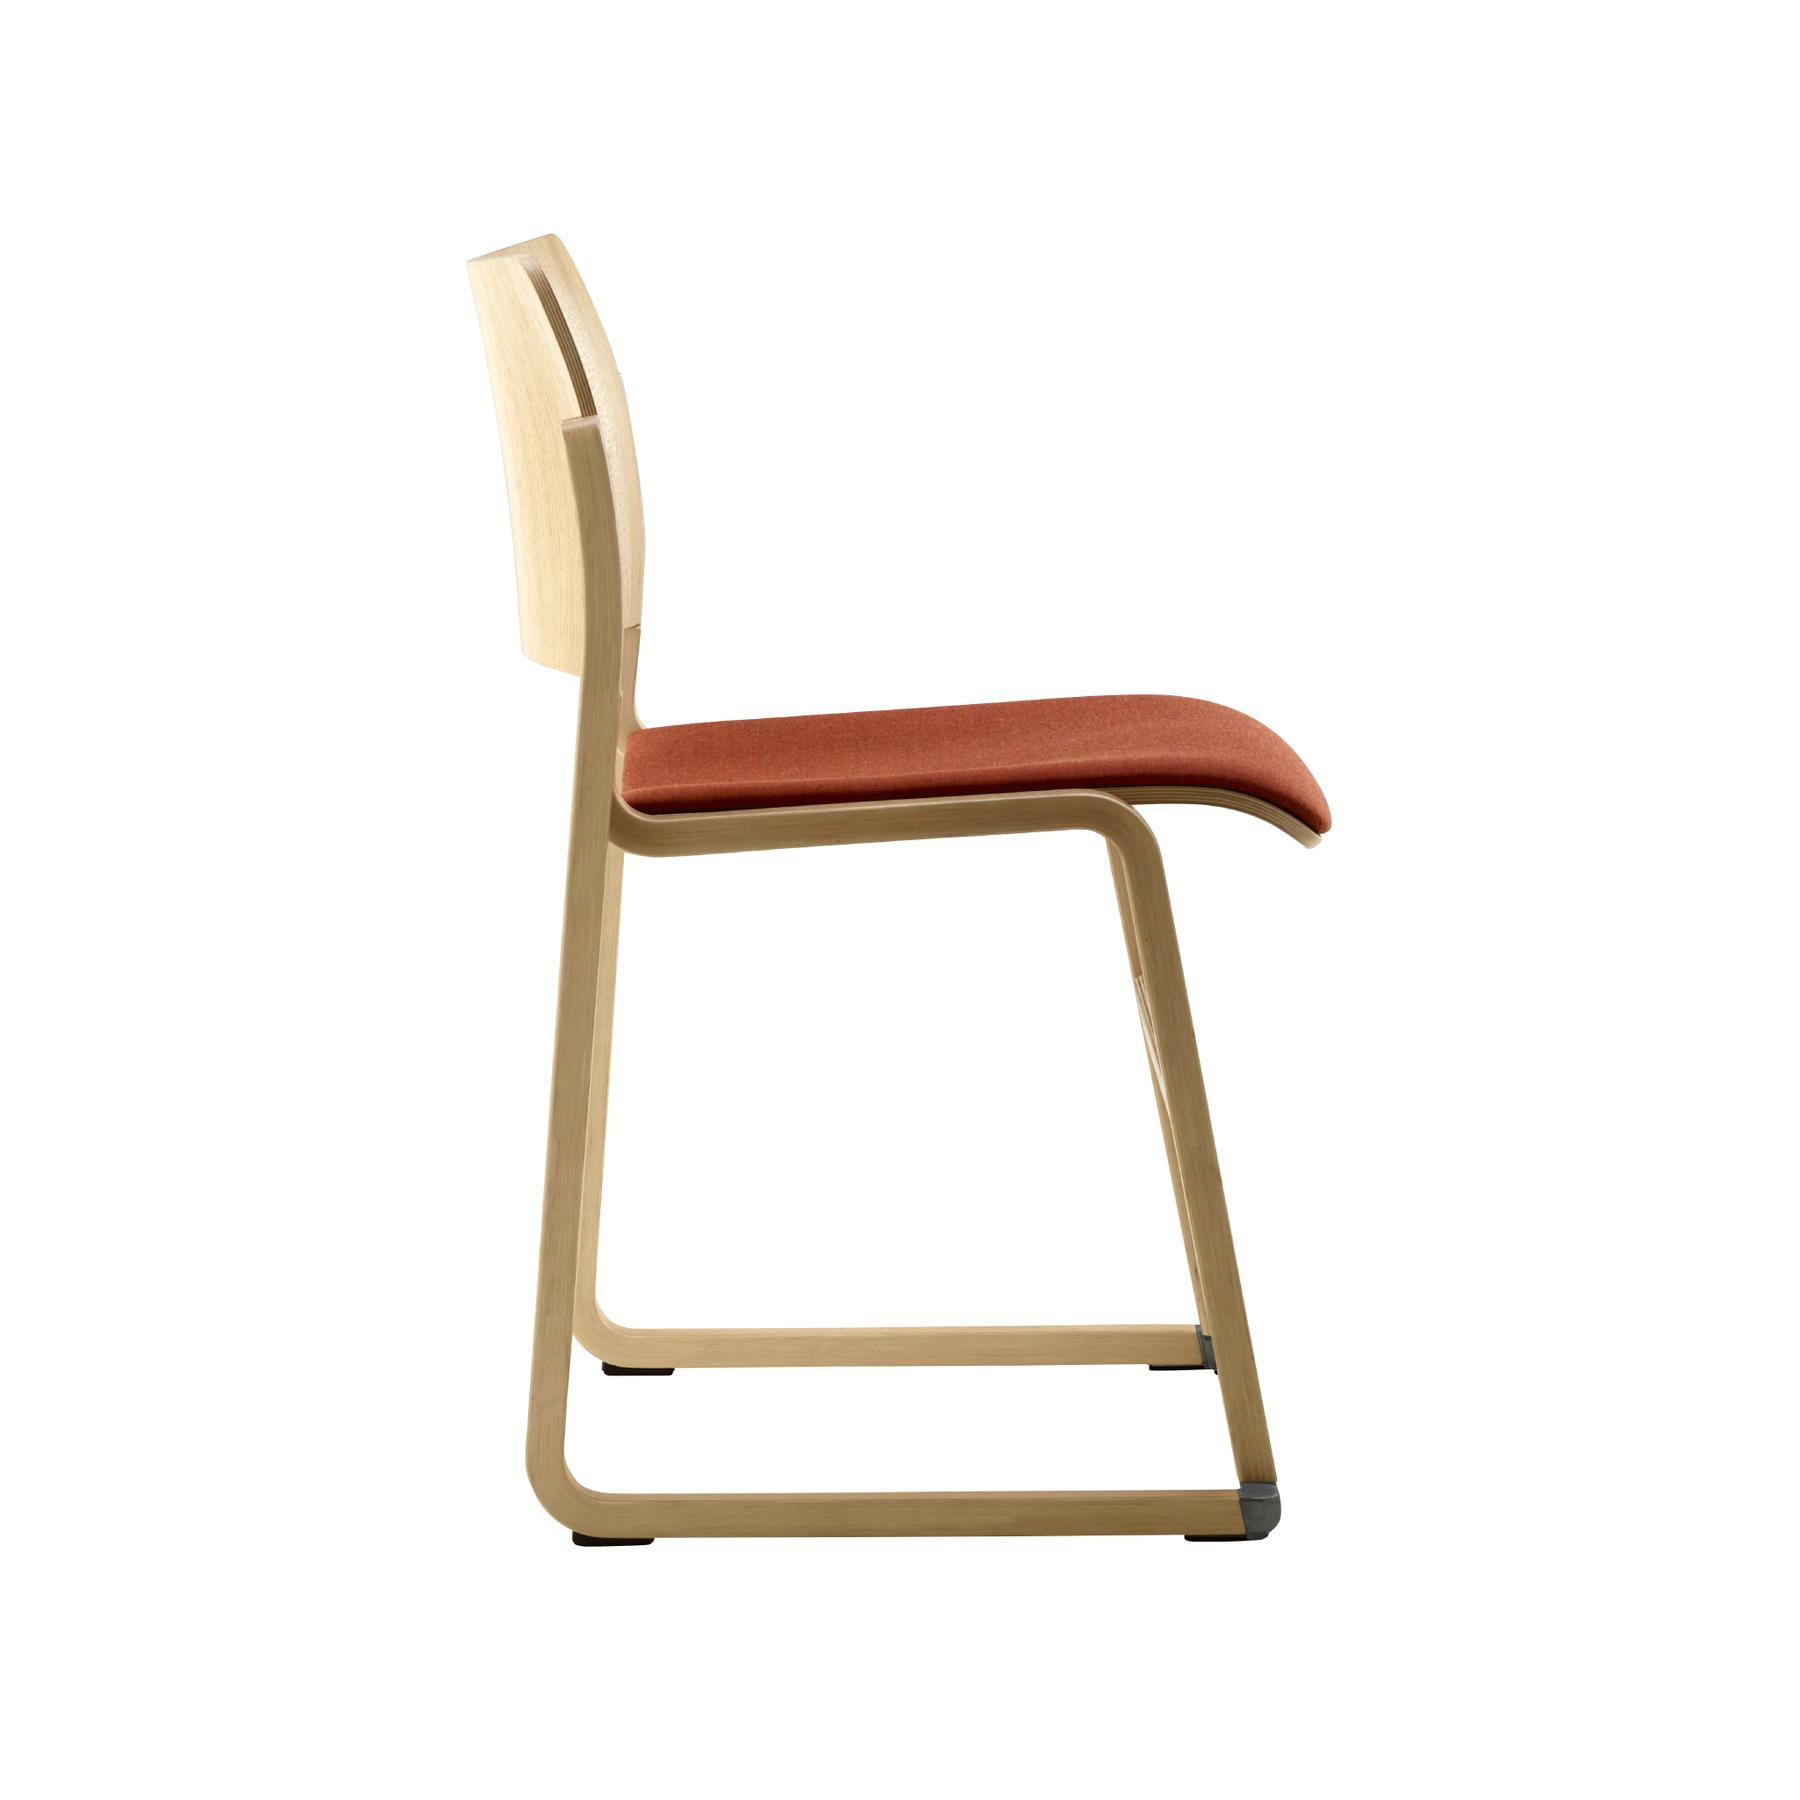 Howe 40/4 upholstered wood stacking chair side view